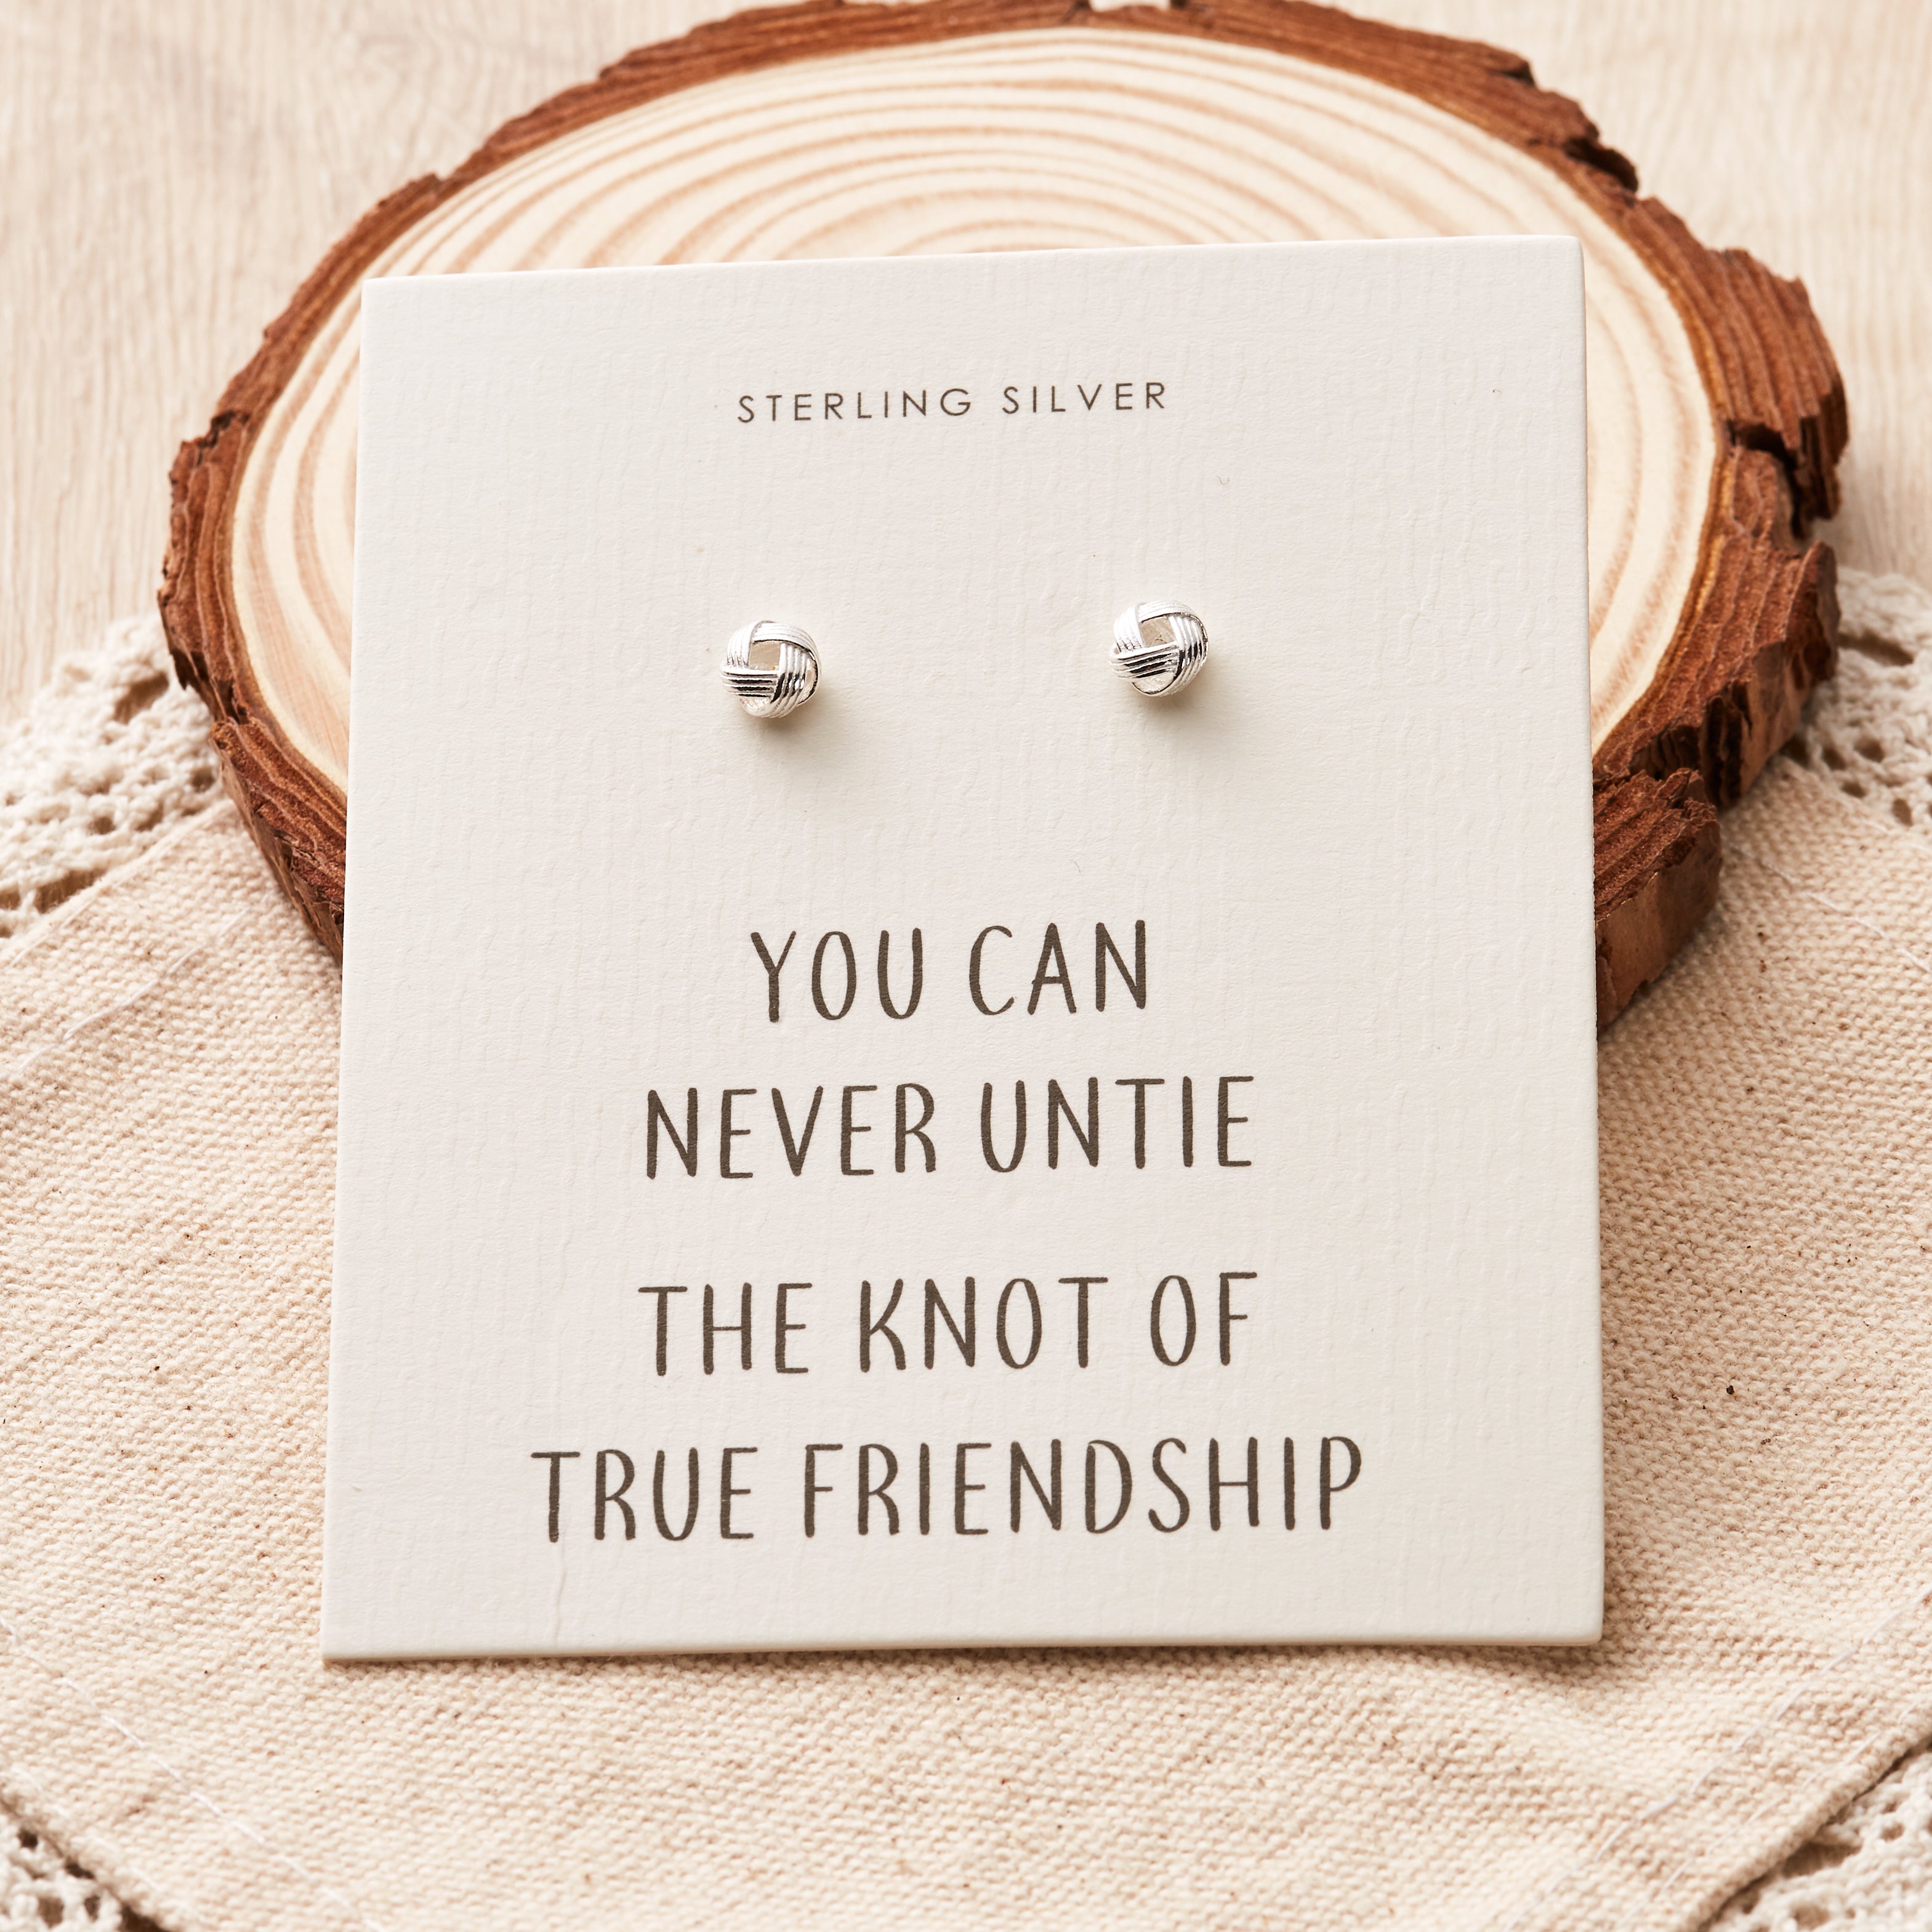 Sterling Silver Friendship Quote Knot Earrings